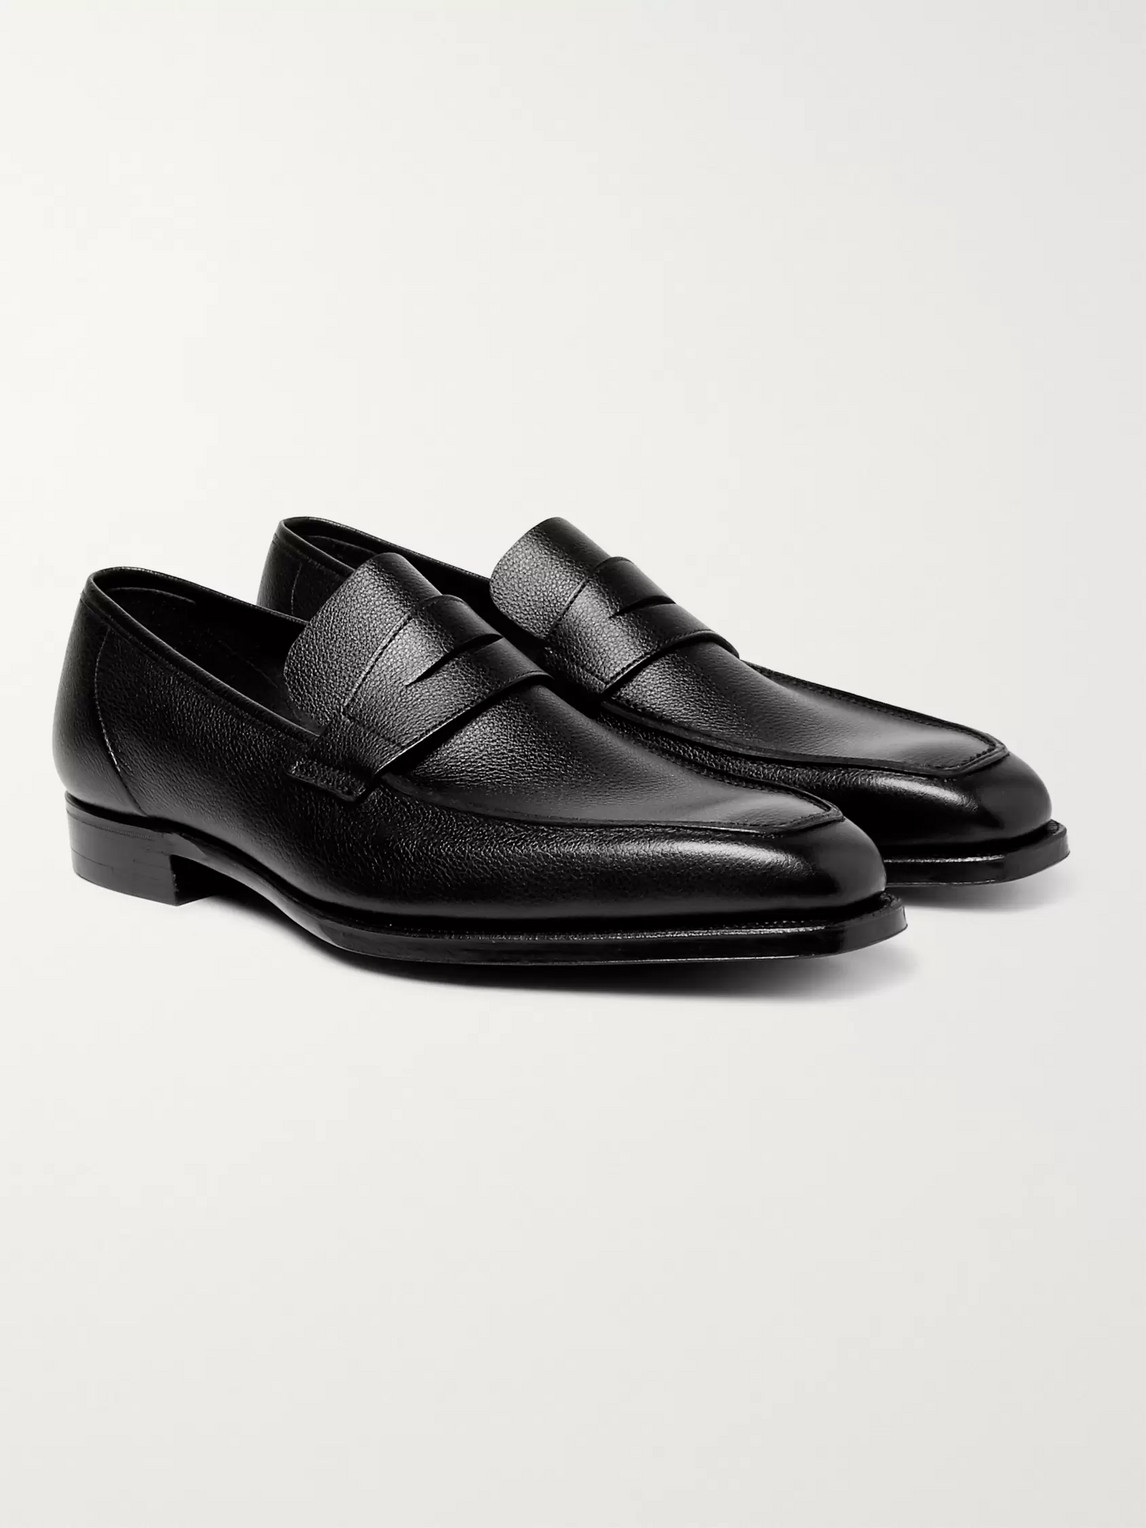 GEORGE CLEVERLEY GEORGE FULL-GRAIN LEATHER PENNY LOAFERS